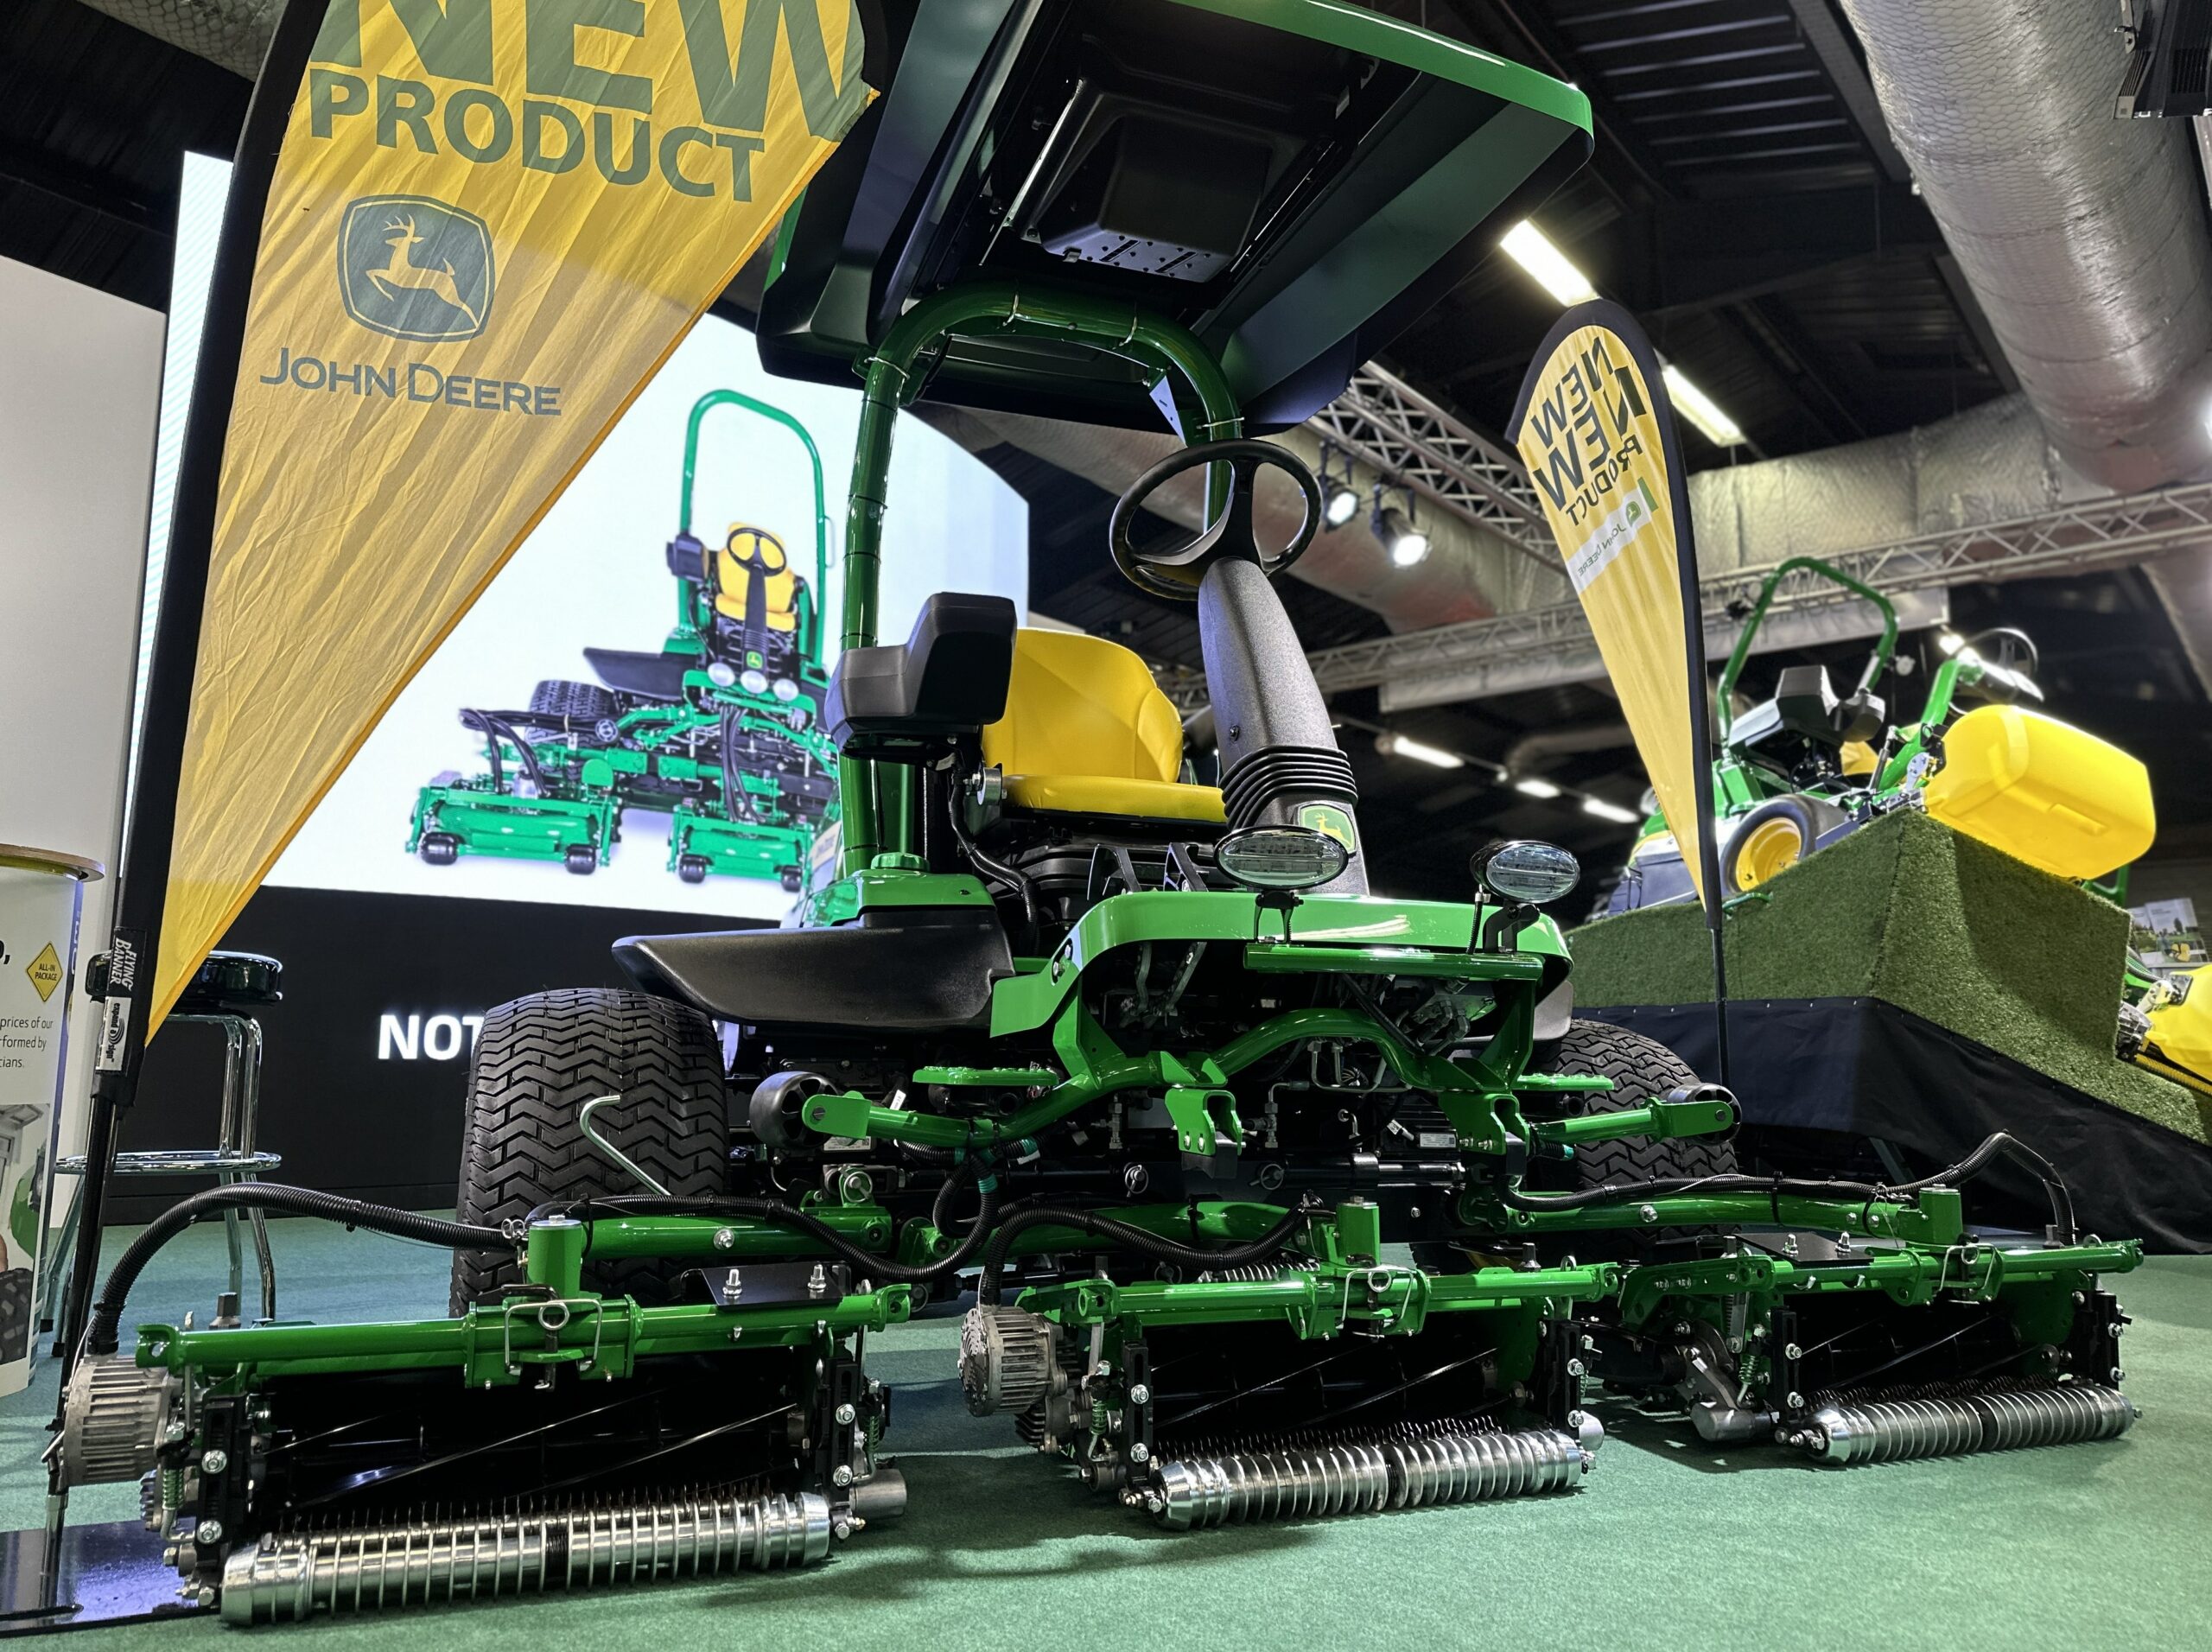 John Deere launches electric greens mowers and hybrid innovations